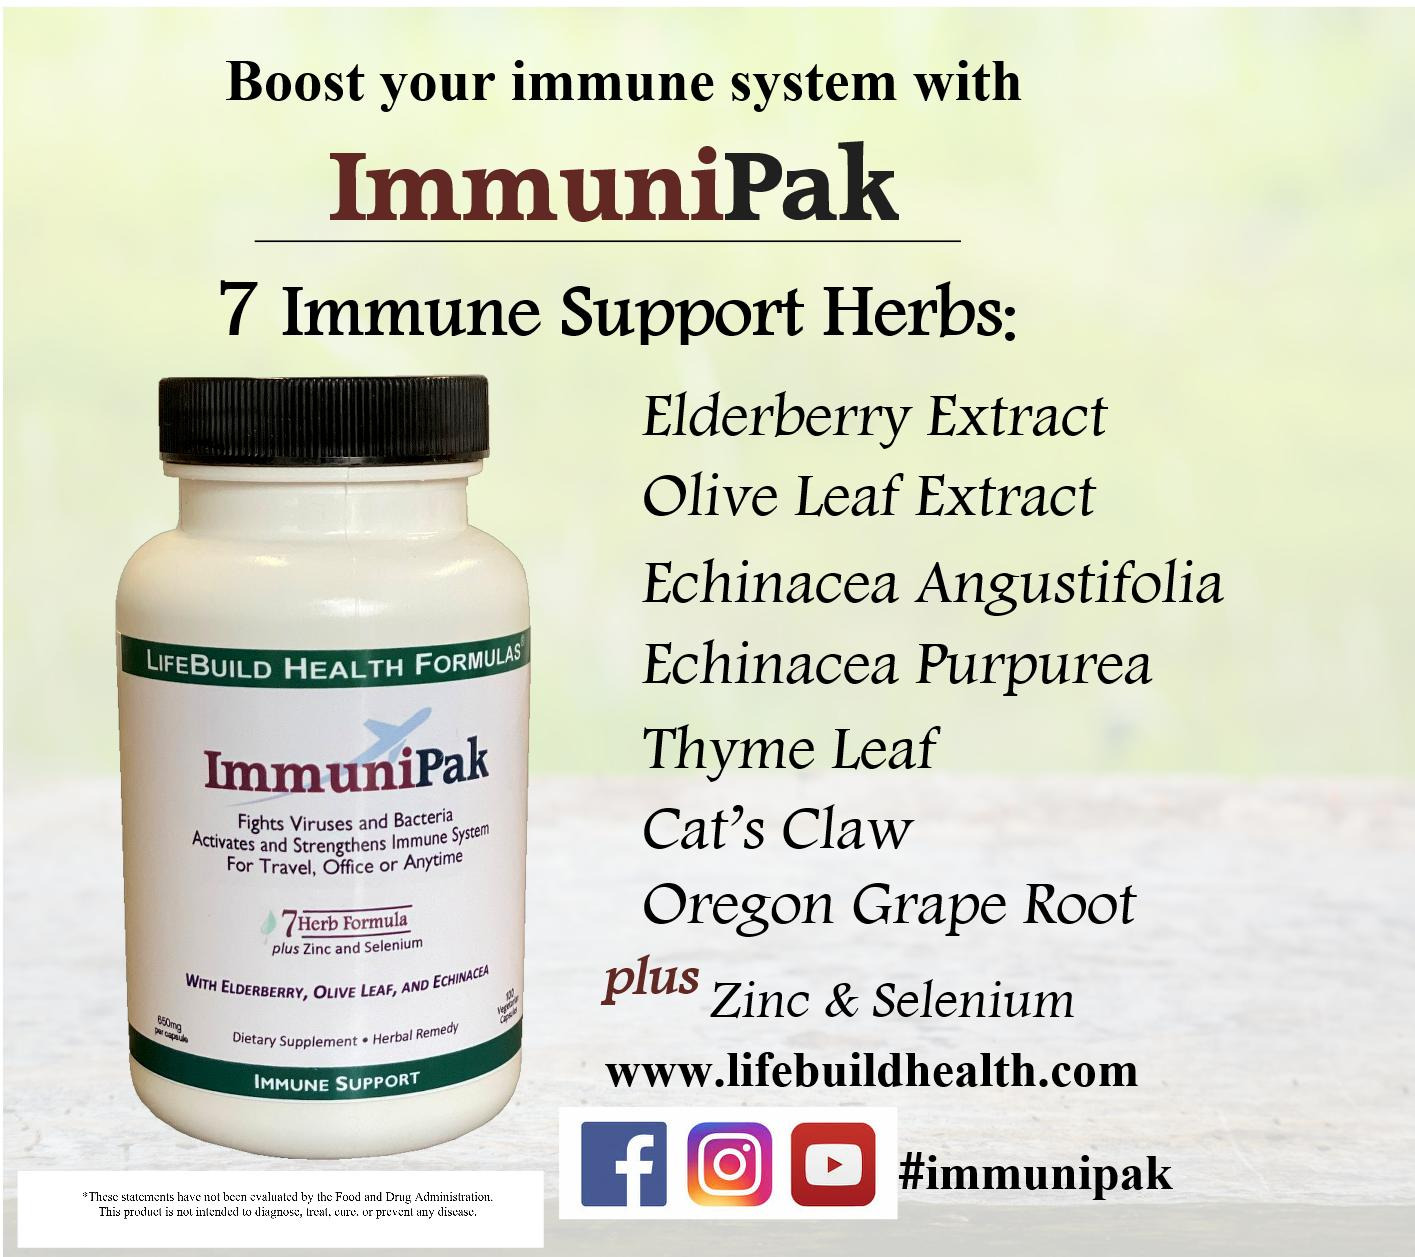 Boost Your Immune System with ImmuniPak